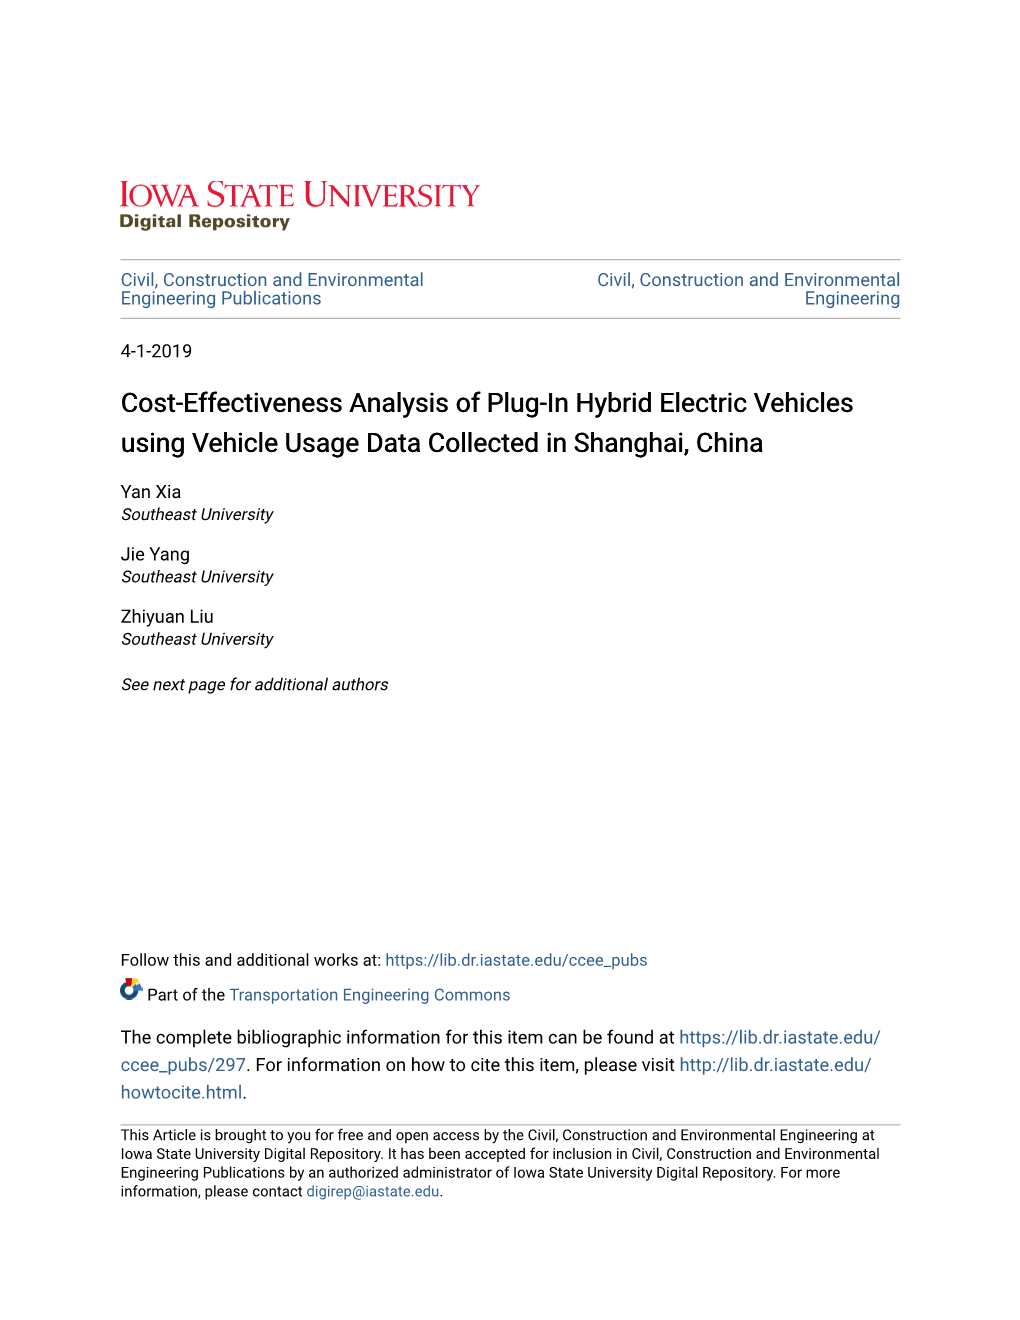 Cost-Effectiveness Analysis of Plug-In Hybrid Electric Vehicles Using Vehicle Usage Data Collected in Shanghai, China